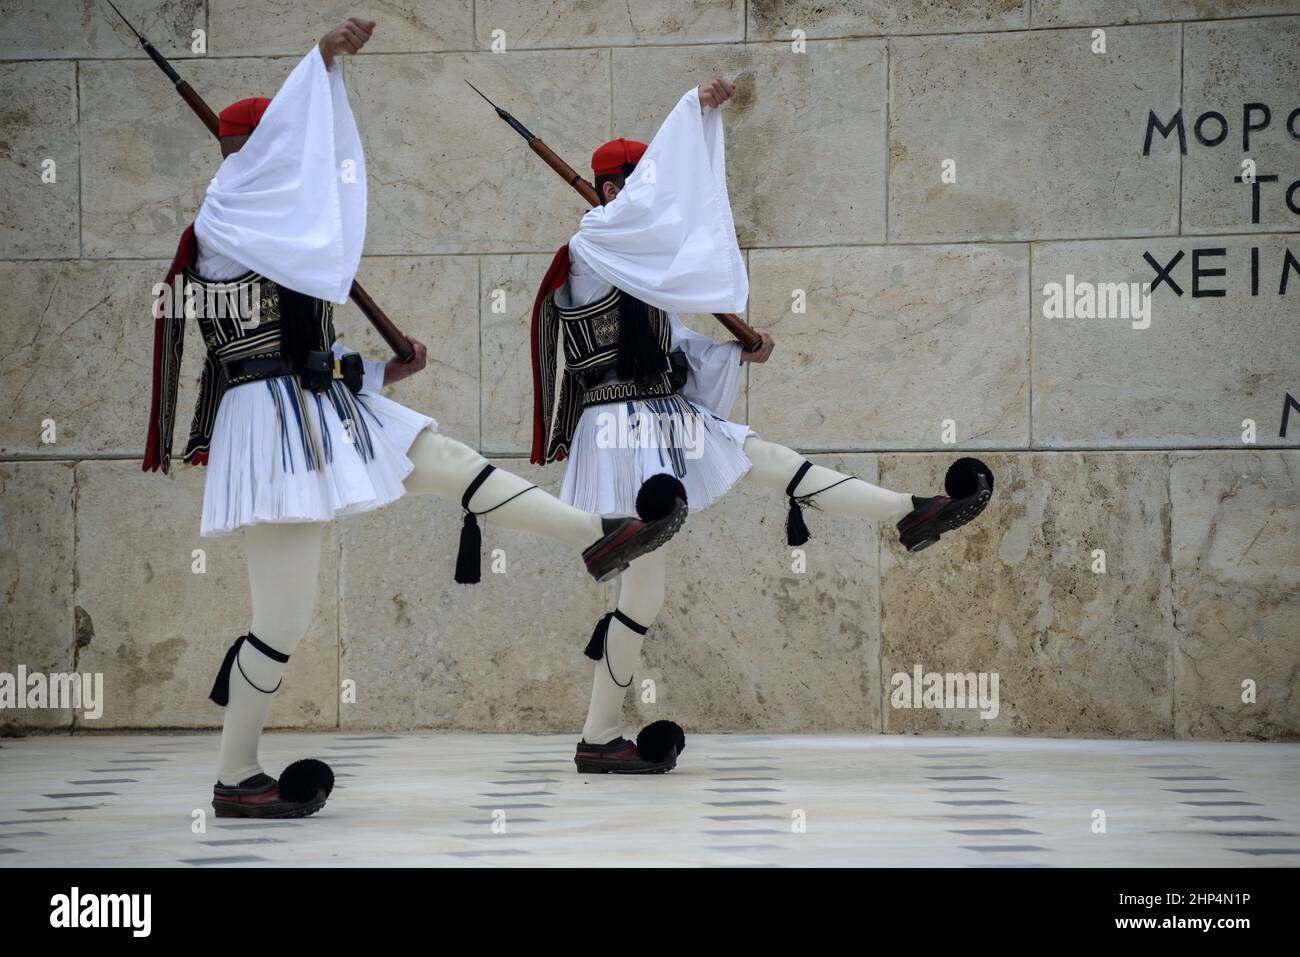 Greek Evzones (Presidential Guards) during the changing of the guards at the Tomb of the Unknown Soldier in Syntagma Sq. ahead of the Greek Parliament. Stock Photo